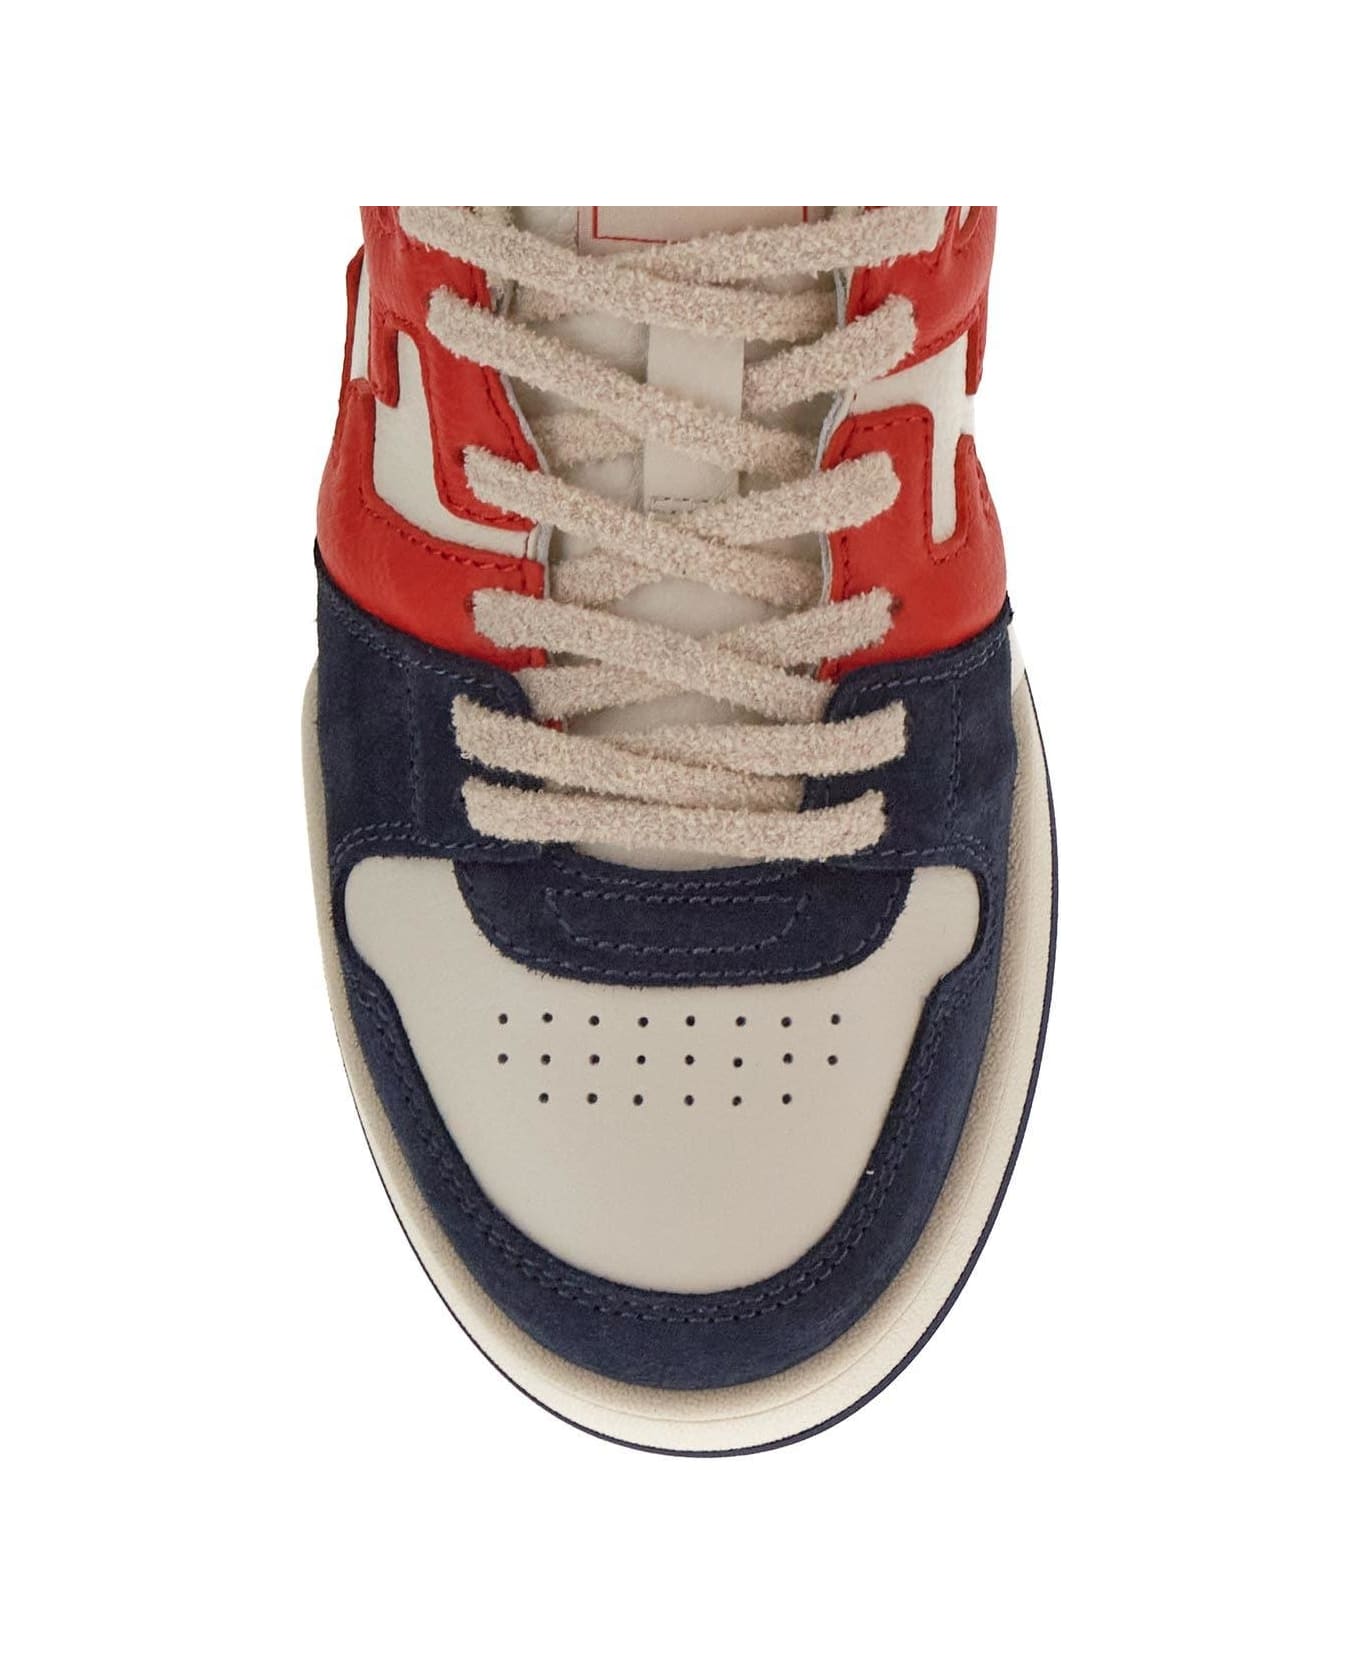 Fendi Low Top Red And Blue Suede Sneaker スニーカー